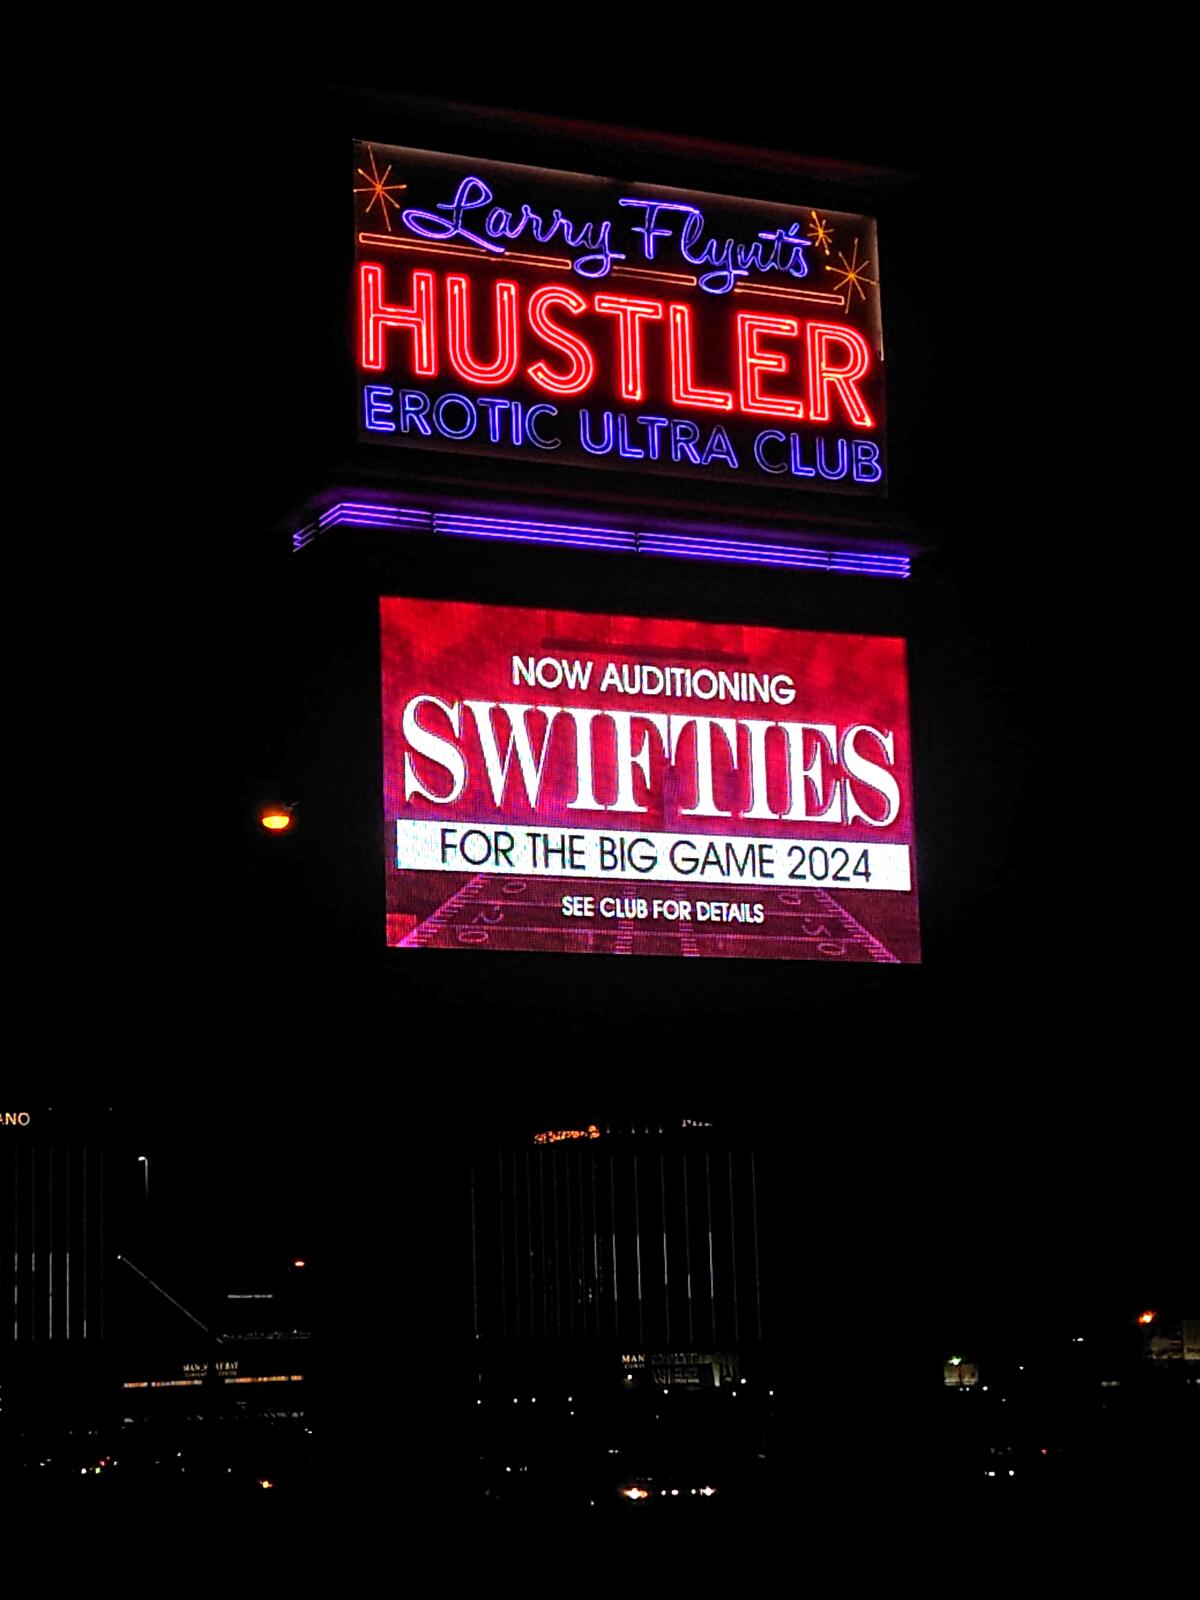 A lighted Hustler Club sign at night announces auditions for Taylor Swift fans.